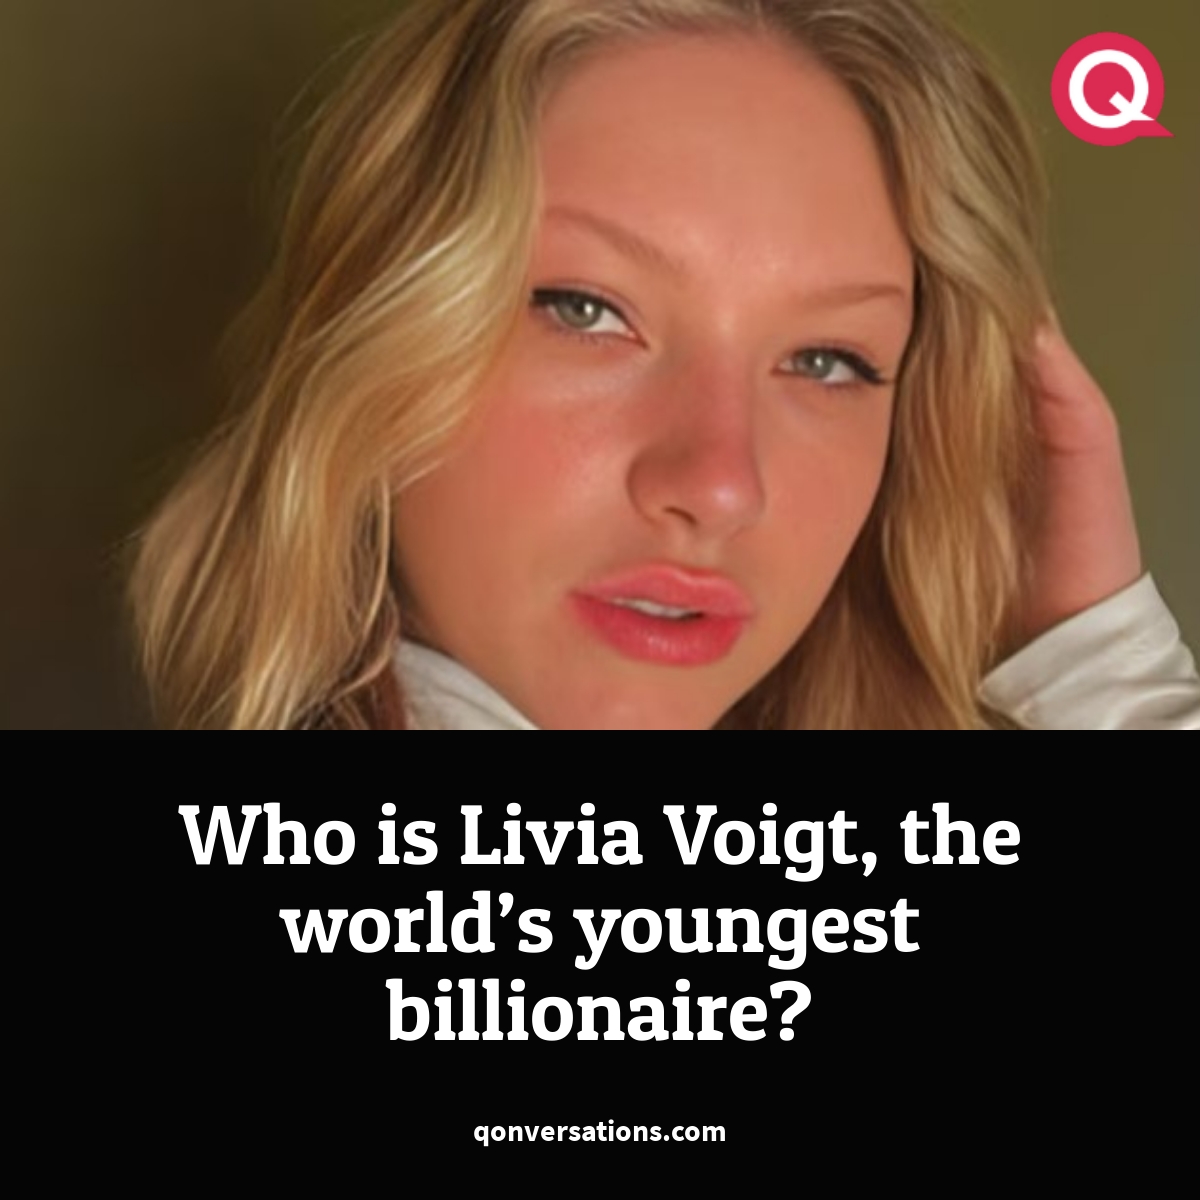 #DidYouKnow #Finance Forbes magazine has named a 19-year-old #Brazilian woman as the world’s youngest billionaire. Find out more: qonversations.com/who-is-livia-v…